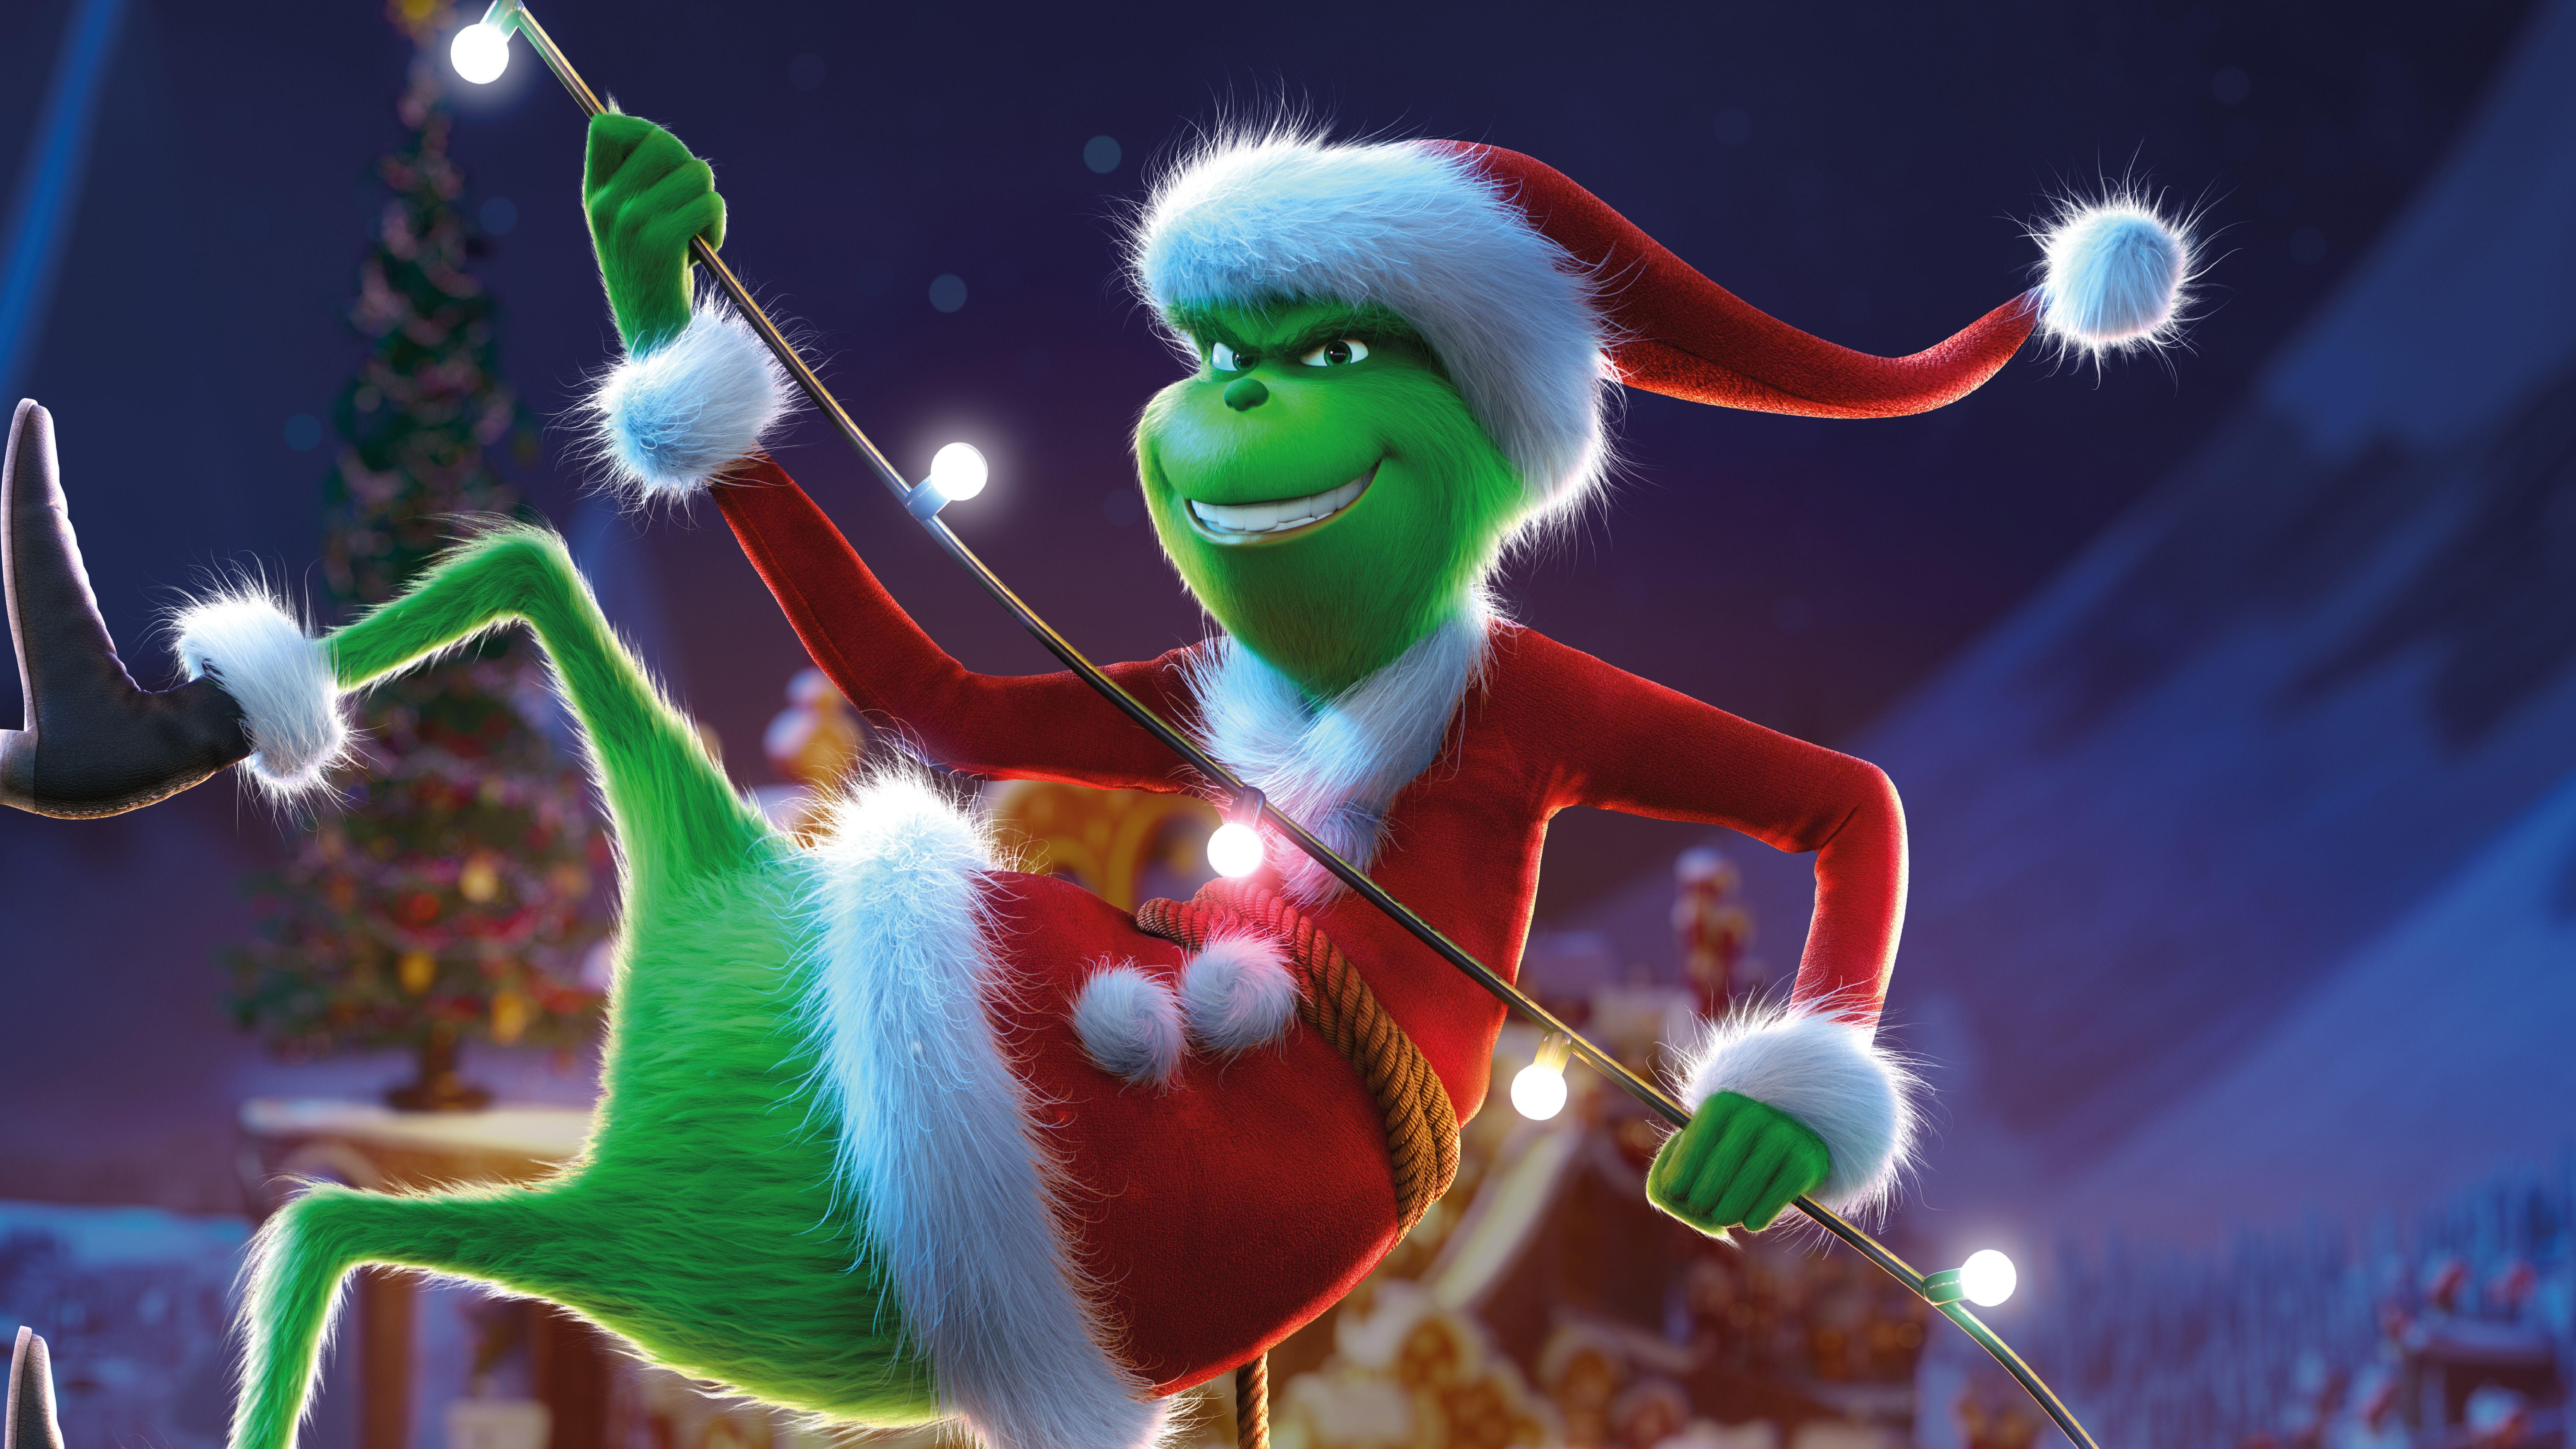 The Grinch 8k, HD Movies, 4k Wallpaper, Image, Background